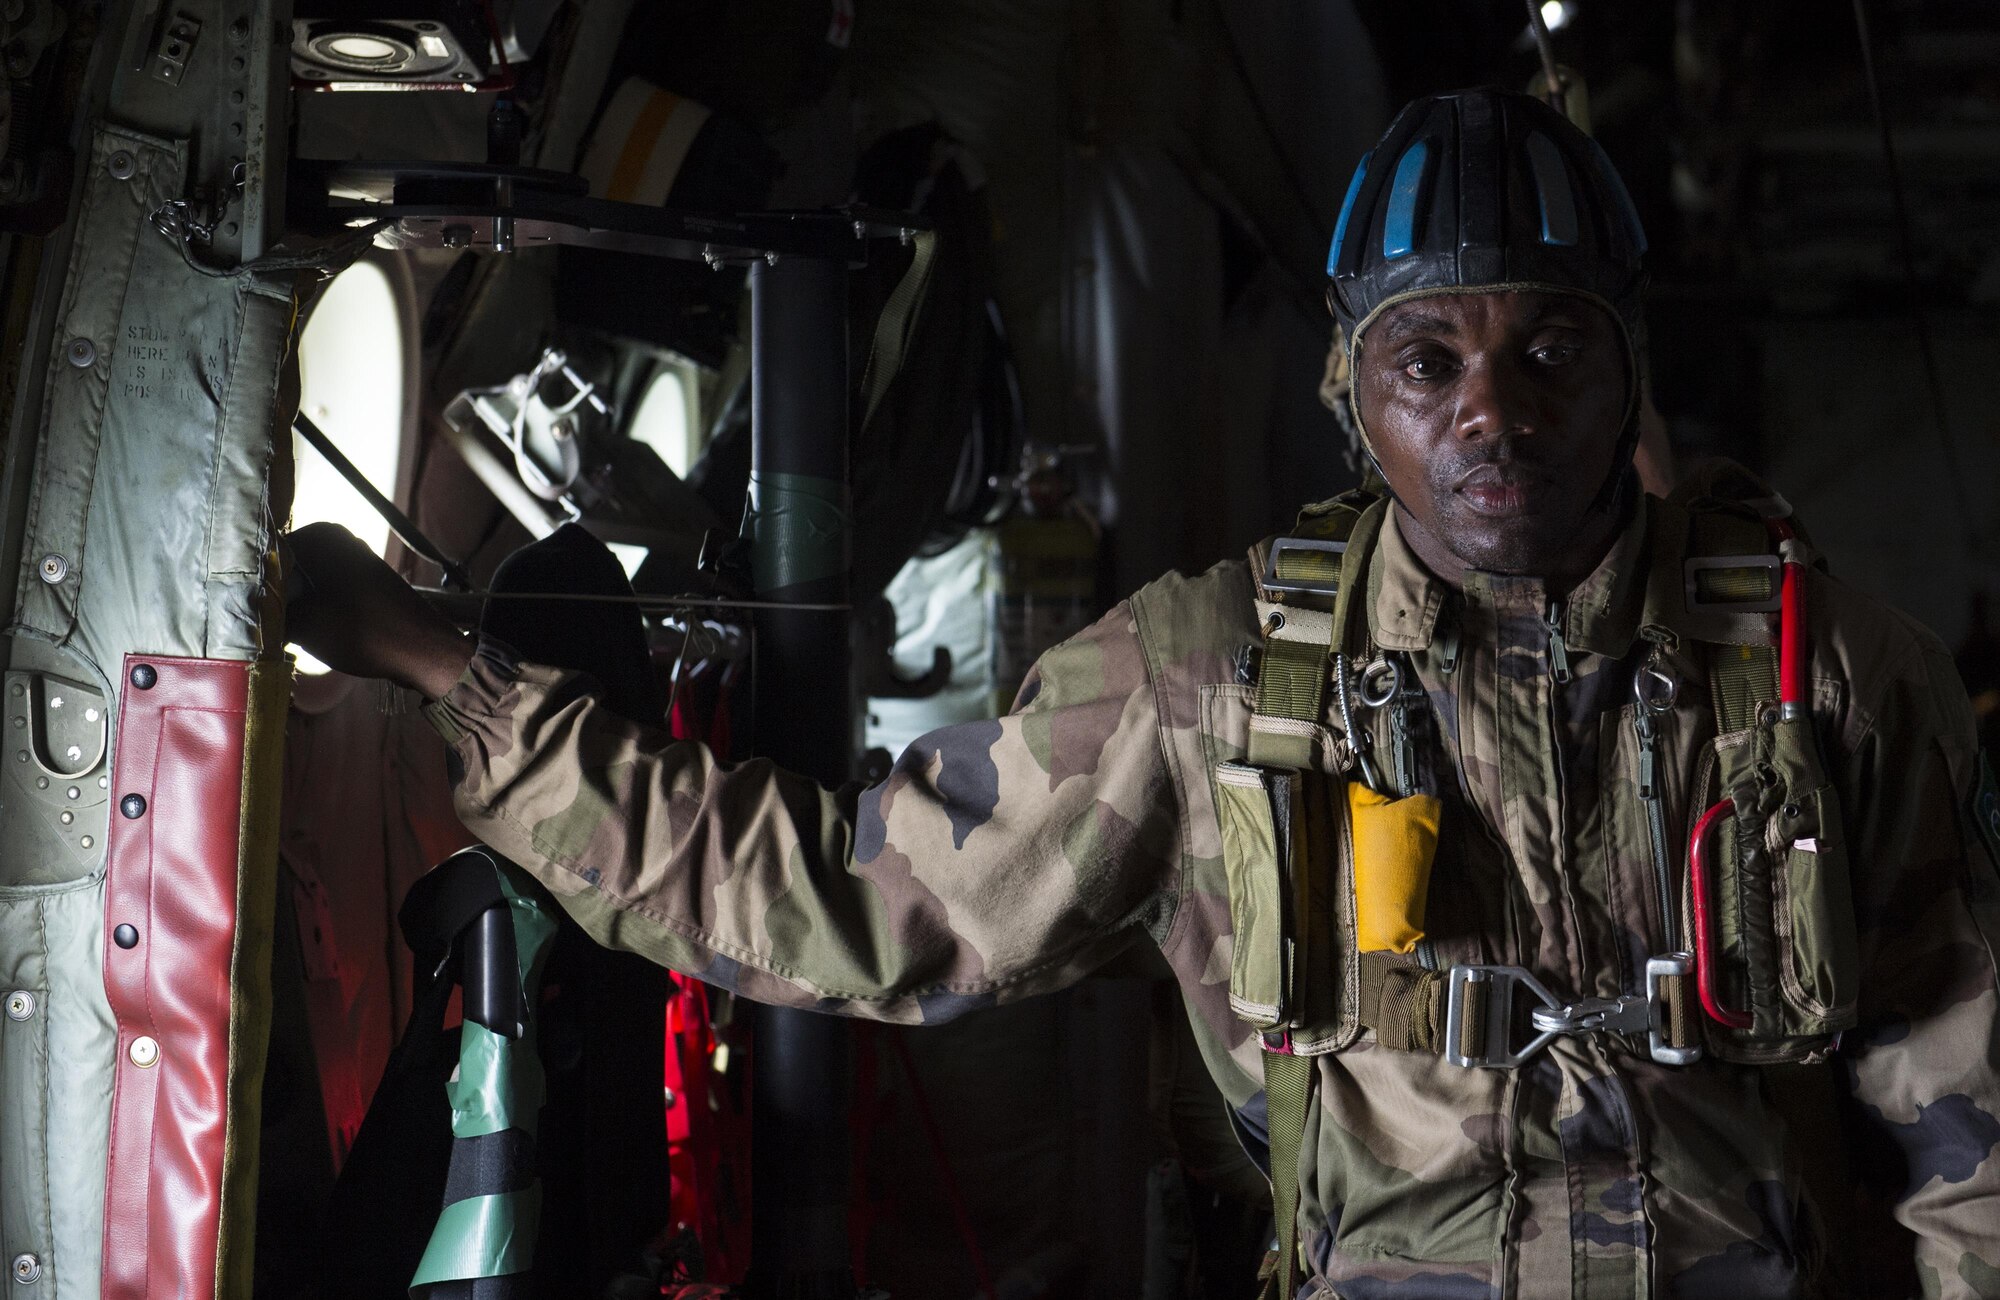 Chief Warrant Officer 2nd Class Lawangu, a jumpmaster with the Gabonese armed forces, assists with directing airdrops for paratroopers from the U.S. Army’s 82nd Airborne Division during exercise Central Accord 2016 in Libreville, Gabon, June 22, 2016. The U.S. Army Africa exercise is an annual, combined, joint military exercise that brings together partner nations to practice and demonstrate proficiency in conducting peacekeeping operations. (DOD photo/Tech. Sgt. Brian Kimball)